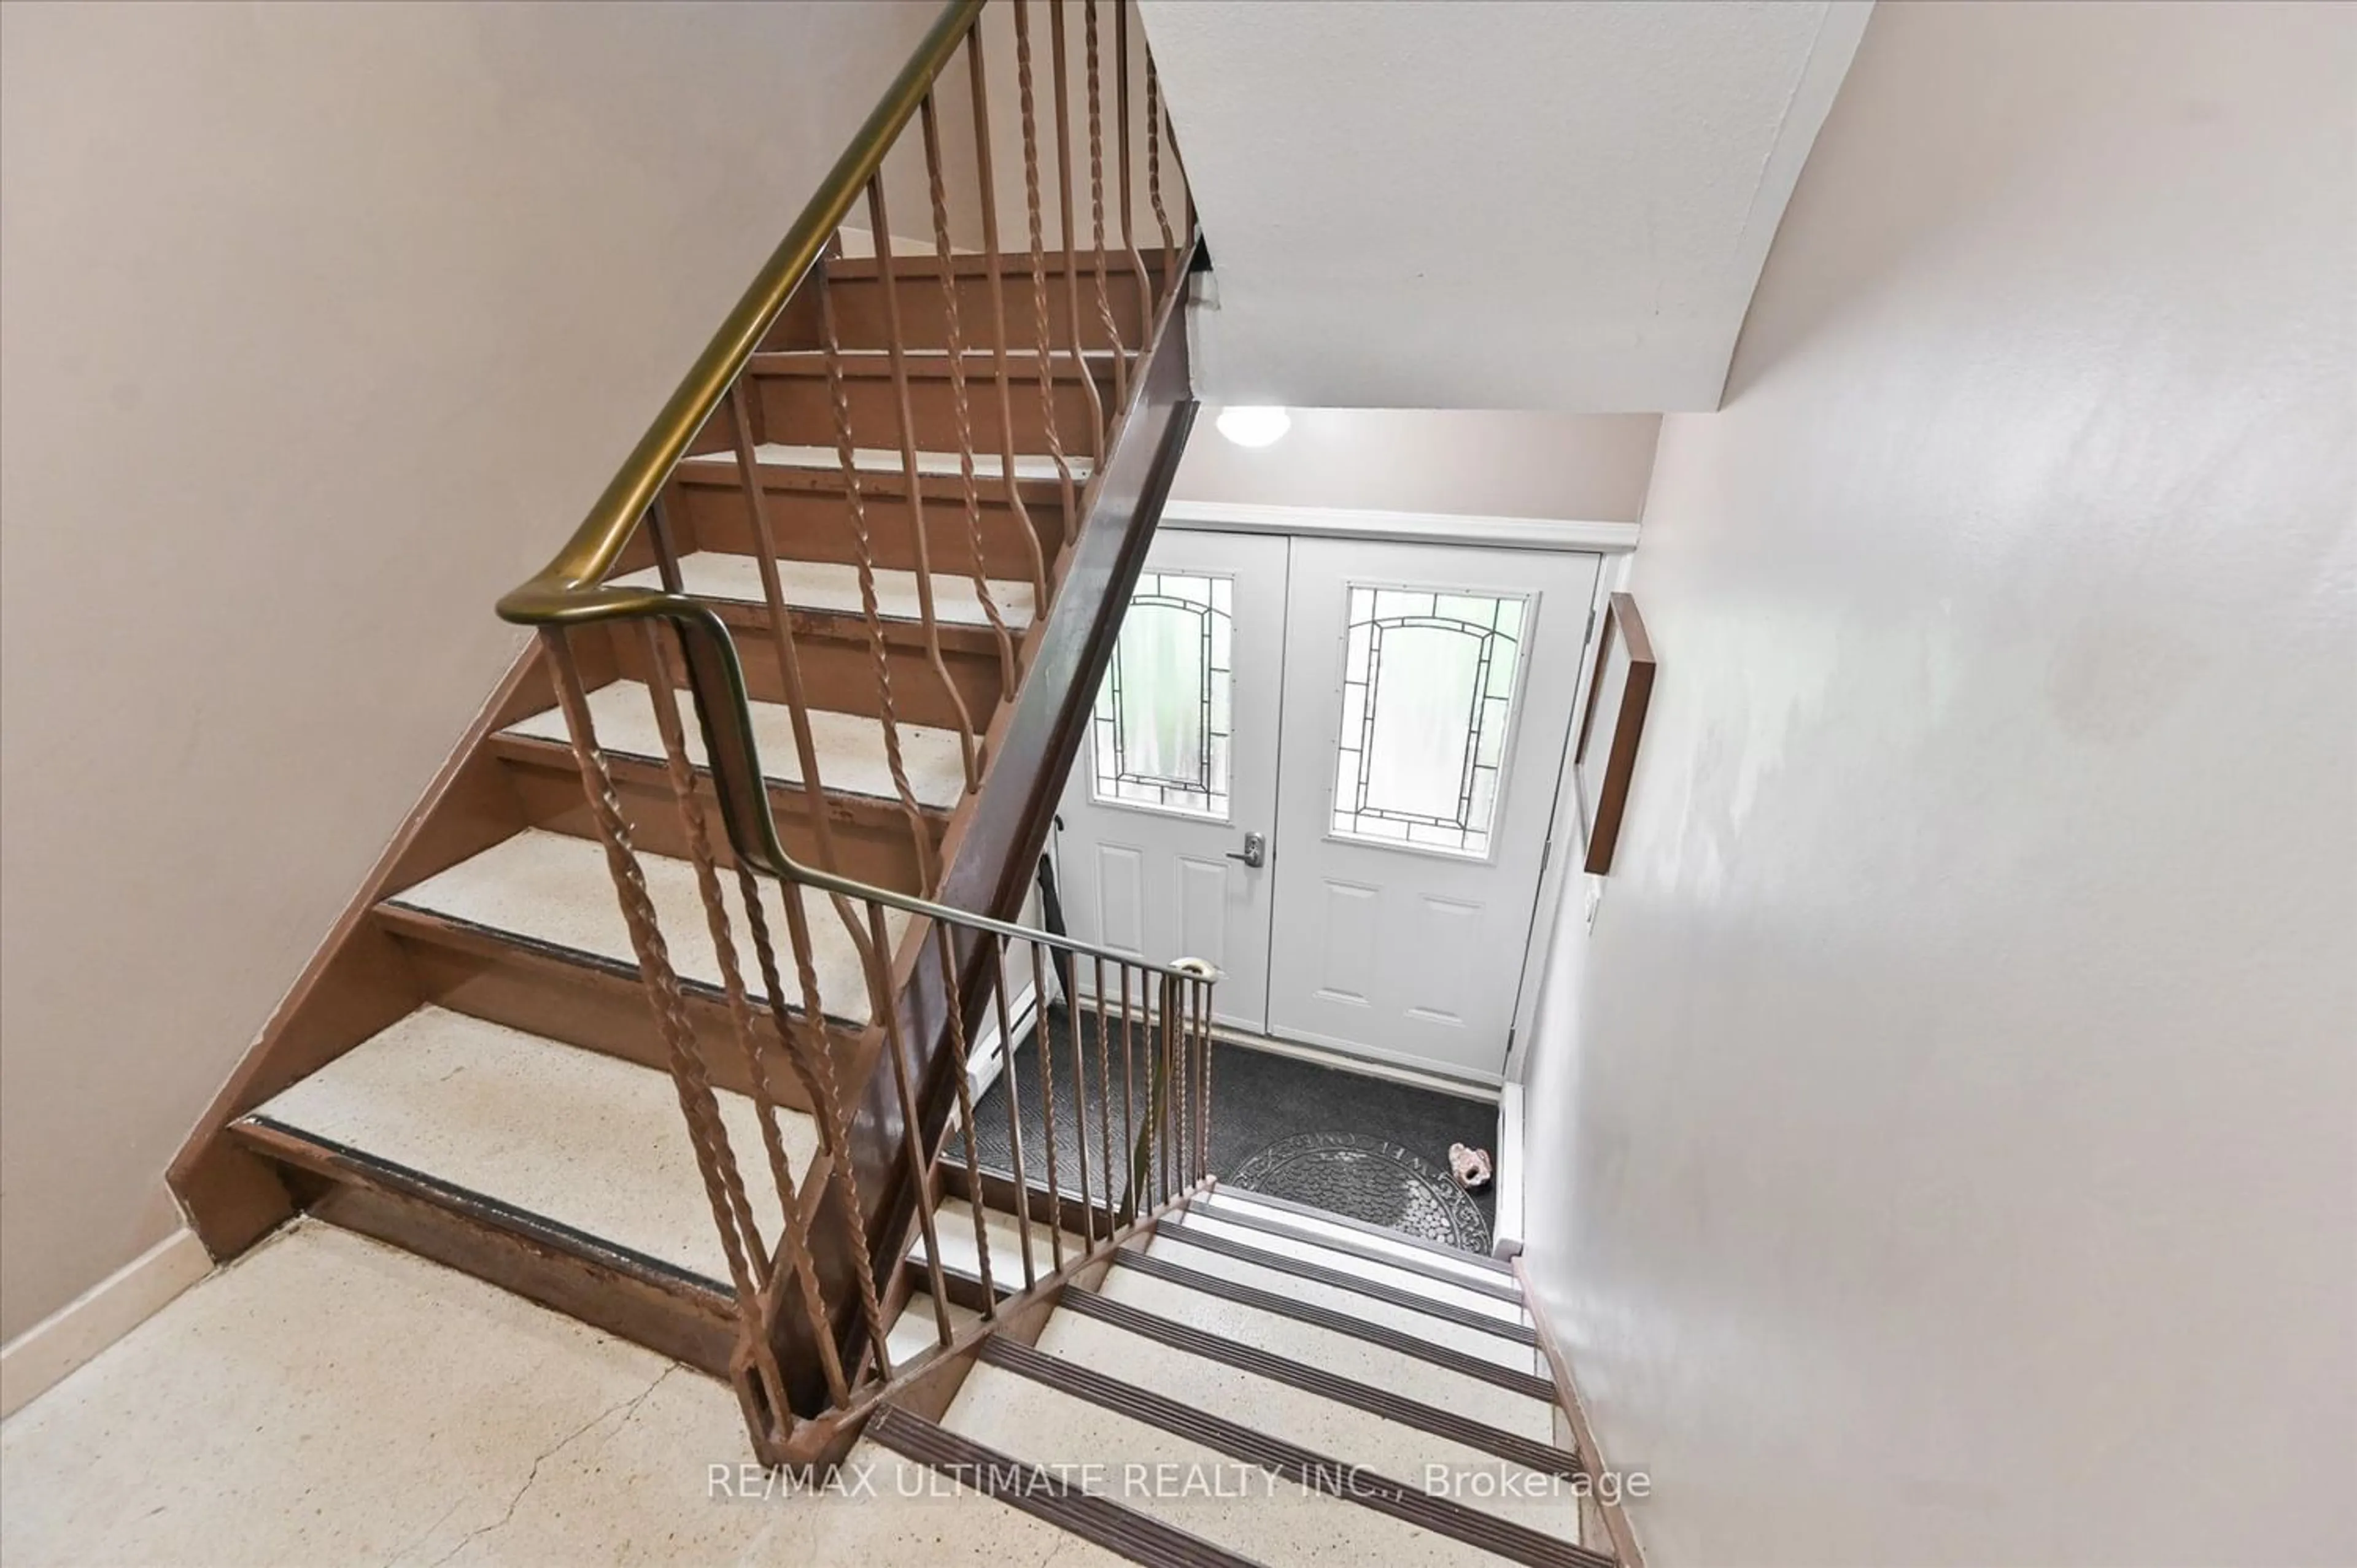 Stairs for 76 Hilldale Rd, Toronto Ontario M6N 3Y2